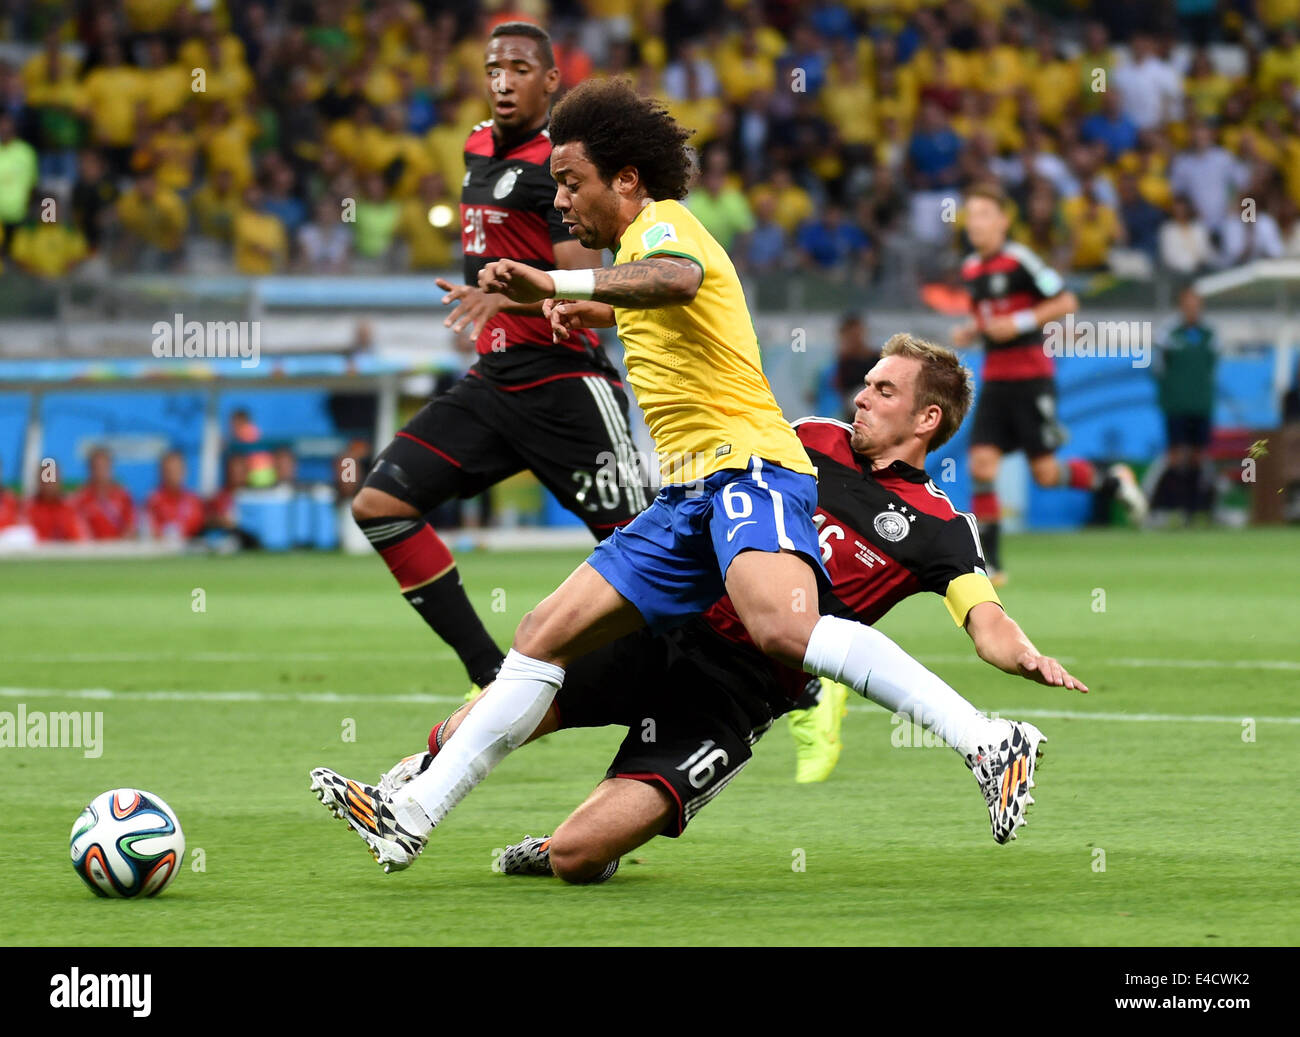 Belo Horizonte, Brazil. 8th July, 2014. Brazil's Marcelo vies with Germany's Philipp Lahm during a semifinal match between Brazil and Germany of 2014 FIFA World Cup at the Estadio Mineirao Stadium in Belo Horizonte, Brazil, on July 8, 2014. Germany won 7-1 over Brazil and qualified for the final on Tuesday. Credit:  Li Ga/Xinhua/Alamy Live News Stock Photo